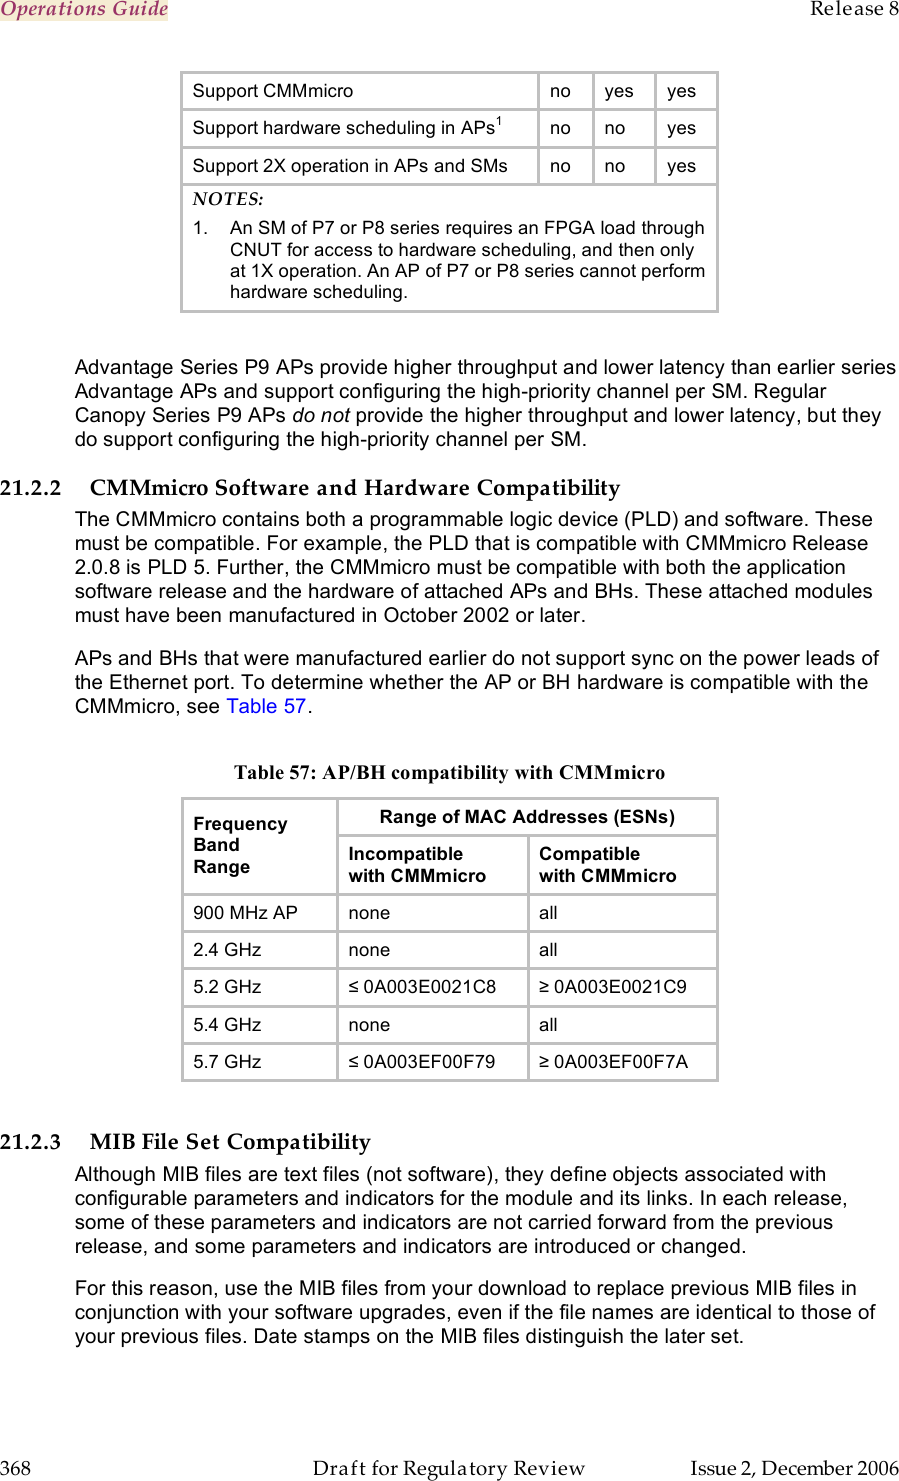 Operations Guide    Release 8   368  Draft for Regulatory Review  Issue 2, December 2006 Support CMMmicro no yes yes Support hardware scheduling in APs1 no no yes Support 2X operation in APs and SMs no no yes NOTES: 1.  An SM of P7 or P8 series requires an FPGA load through CNUT for access to hardware scheduling, and then only  at 1X operation. An AP of P7 or P8 series cannot perform  hardware scheduling.  Advantage Series P9 APs provide higher throughput and lower latency than earlier series Advantage APs and support configuring the high-priority channel per SM. Regular Canopy Series P9 APs do not provide the higher throughput and lower latency, but they do support configuring the high-priority channel per SM. 21.2.2 CMMmicro Software and Hardware Compatibility The CMMmicro contains both a programmable logic device (PLD) and software. These must be compatible. For example, the PLD that is compatible with CMMmicro Release 2.0.8 is PLD 5. Further, the CMMmicro must be compatible with both the application software release and the hardware of attached APs and BHs. These attached modules must have been manufactured in October 2002 or later. APs and BHs that were manufactured earlier do not support sync on the power leads of the Ethernet port. To determine whether the AP or BH hardware is compatible with the CMMmicro, see Table 57.  Table 57: AP/BH compatibility with CMMmicro Range of MAC Addresses (ESNs) Frequency Band Range Incompatible with CMMmicro Compatible with CMMmicro 900 MHz AP none all 2.4 GHz none all 5.2 GHz ≤ 0A003E0021C8 ≥ 0A003E0021C9 5.4 GHz none all 5.7 GHz ≤ 0A003EF00F79 ≥ 0A003EF00F7A  21.2.3 MIB File Set Compatibility Although MIB files are text files (not software), they define objects associated with configurable parameters and indicators for the module and its links. In each release, some of these parameters and indicators are not carried forward from the previous release, and some parameters and indicators are introduced or changed.  For this reason, use the MIB files from your download to replace previous MIB files in conjunction with your software upgrades, even if the file names are identical to those of your previous files. Date stamps on the MIB files distinguish the later set. 